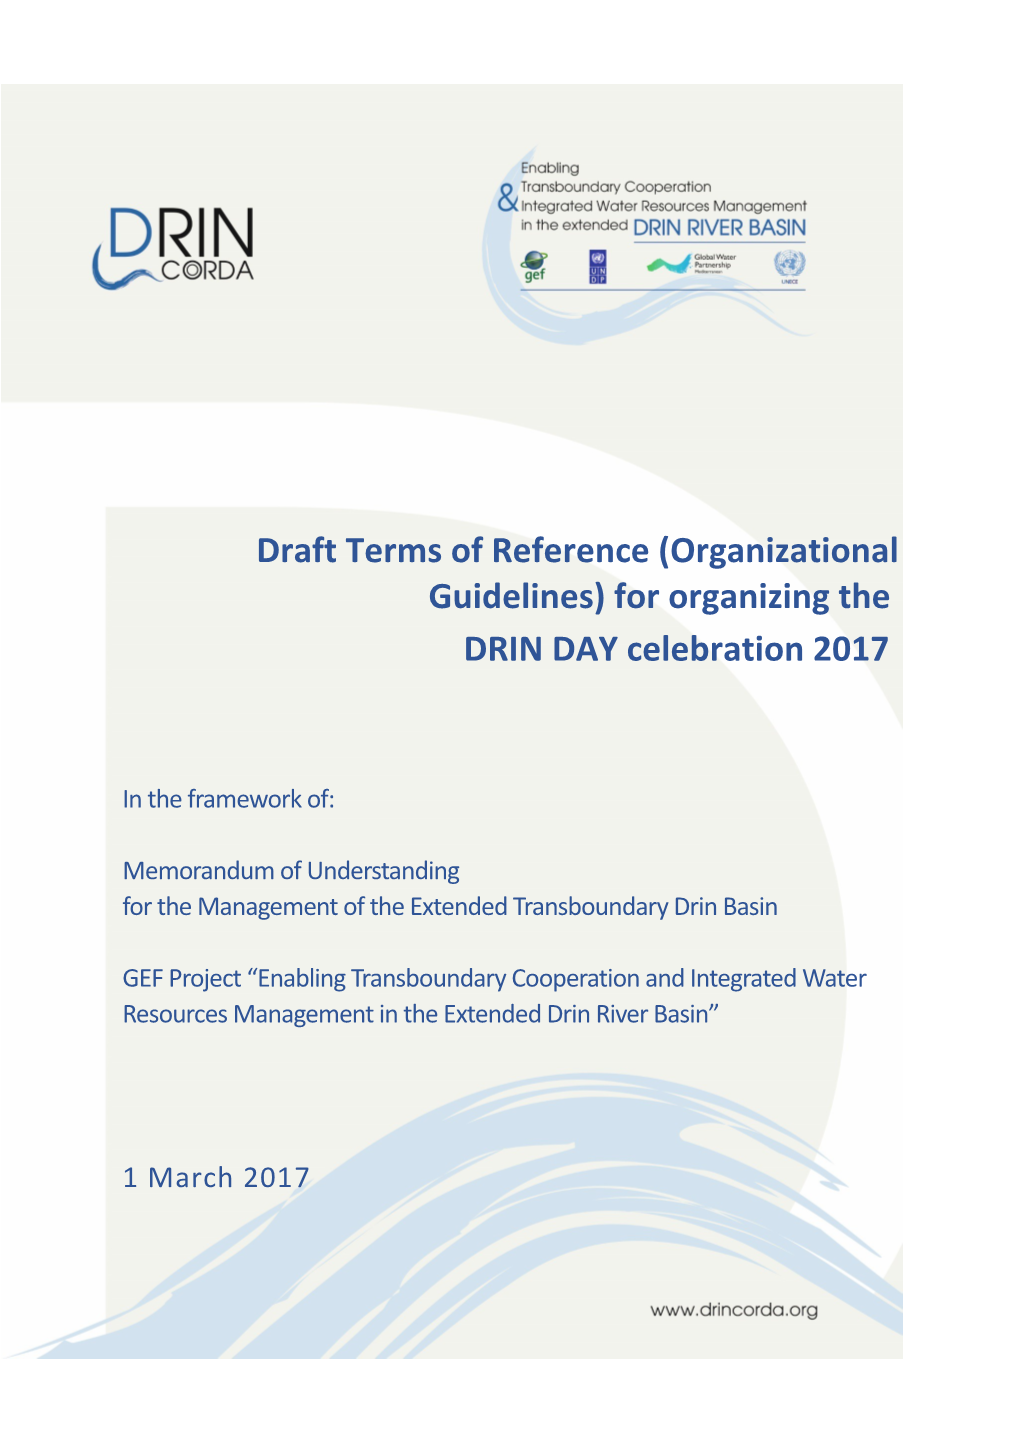 Draft Terms of Reference (Organizational Guidelines) for Organizing The